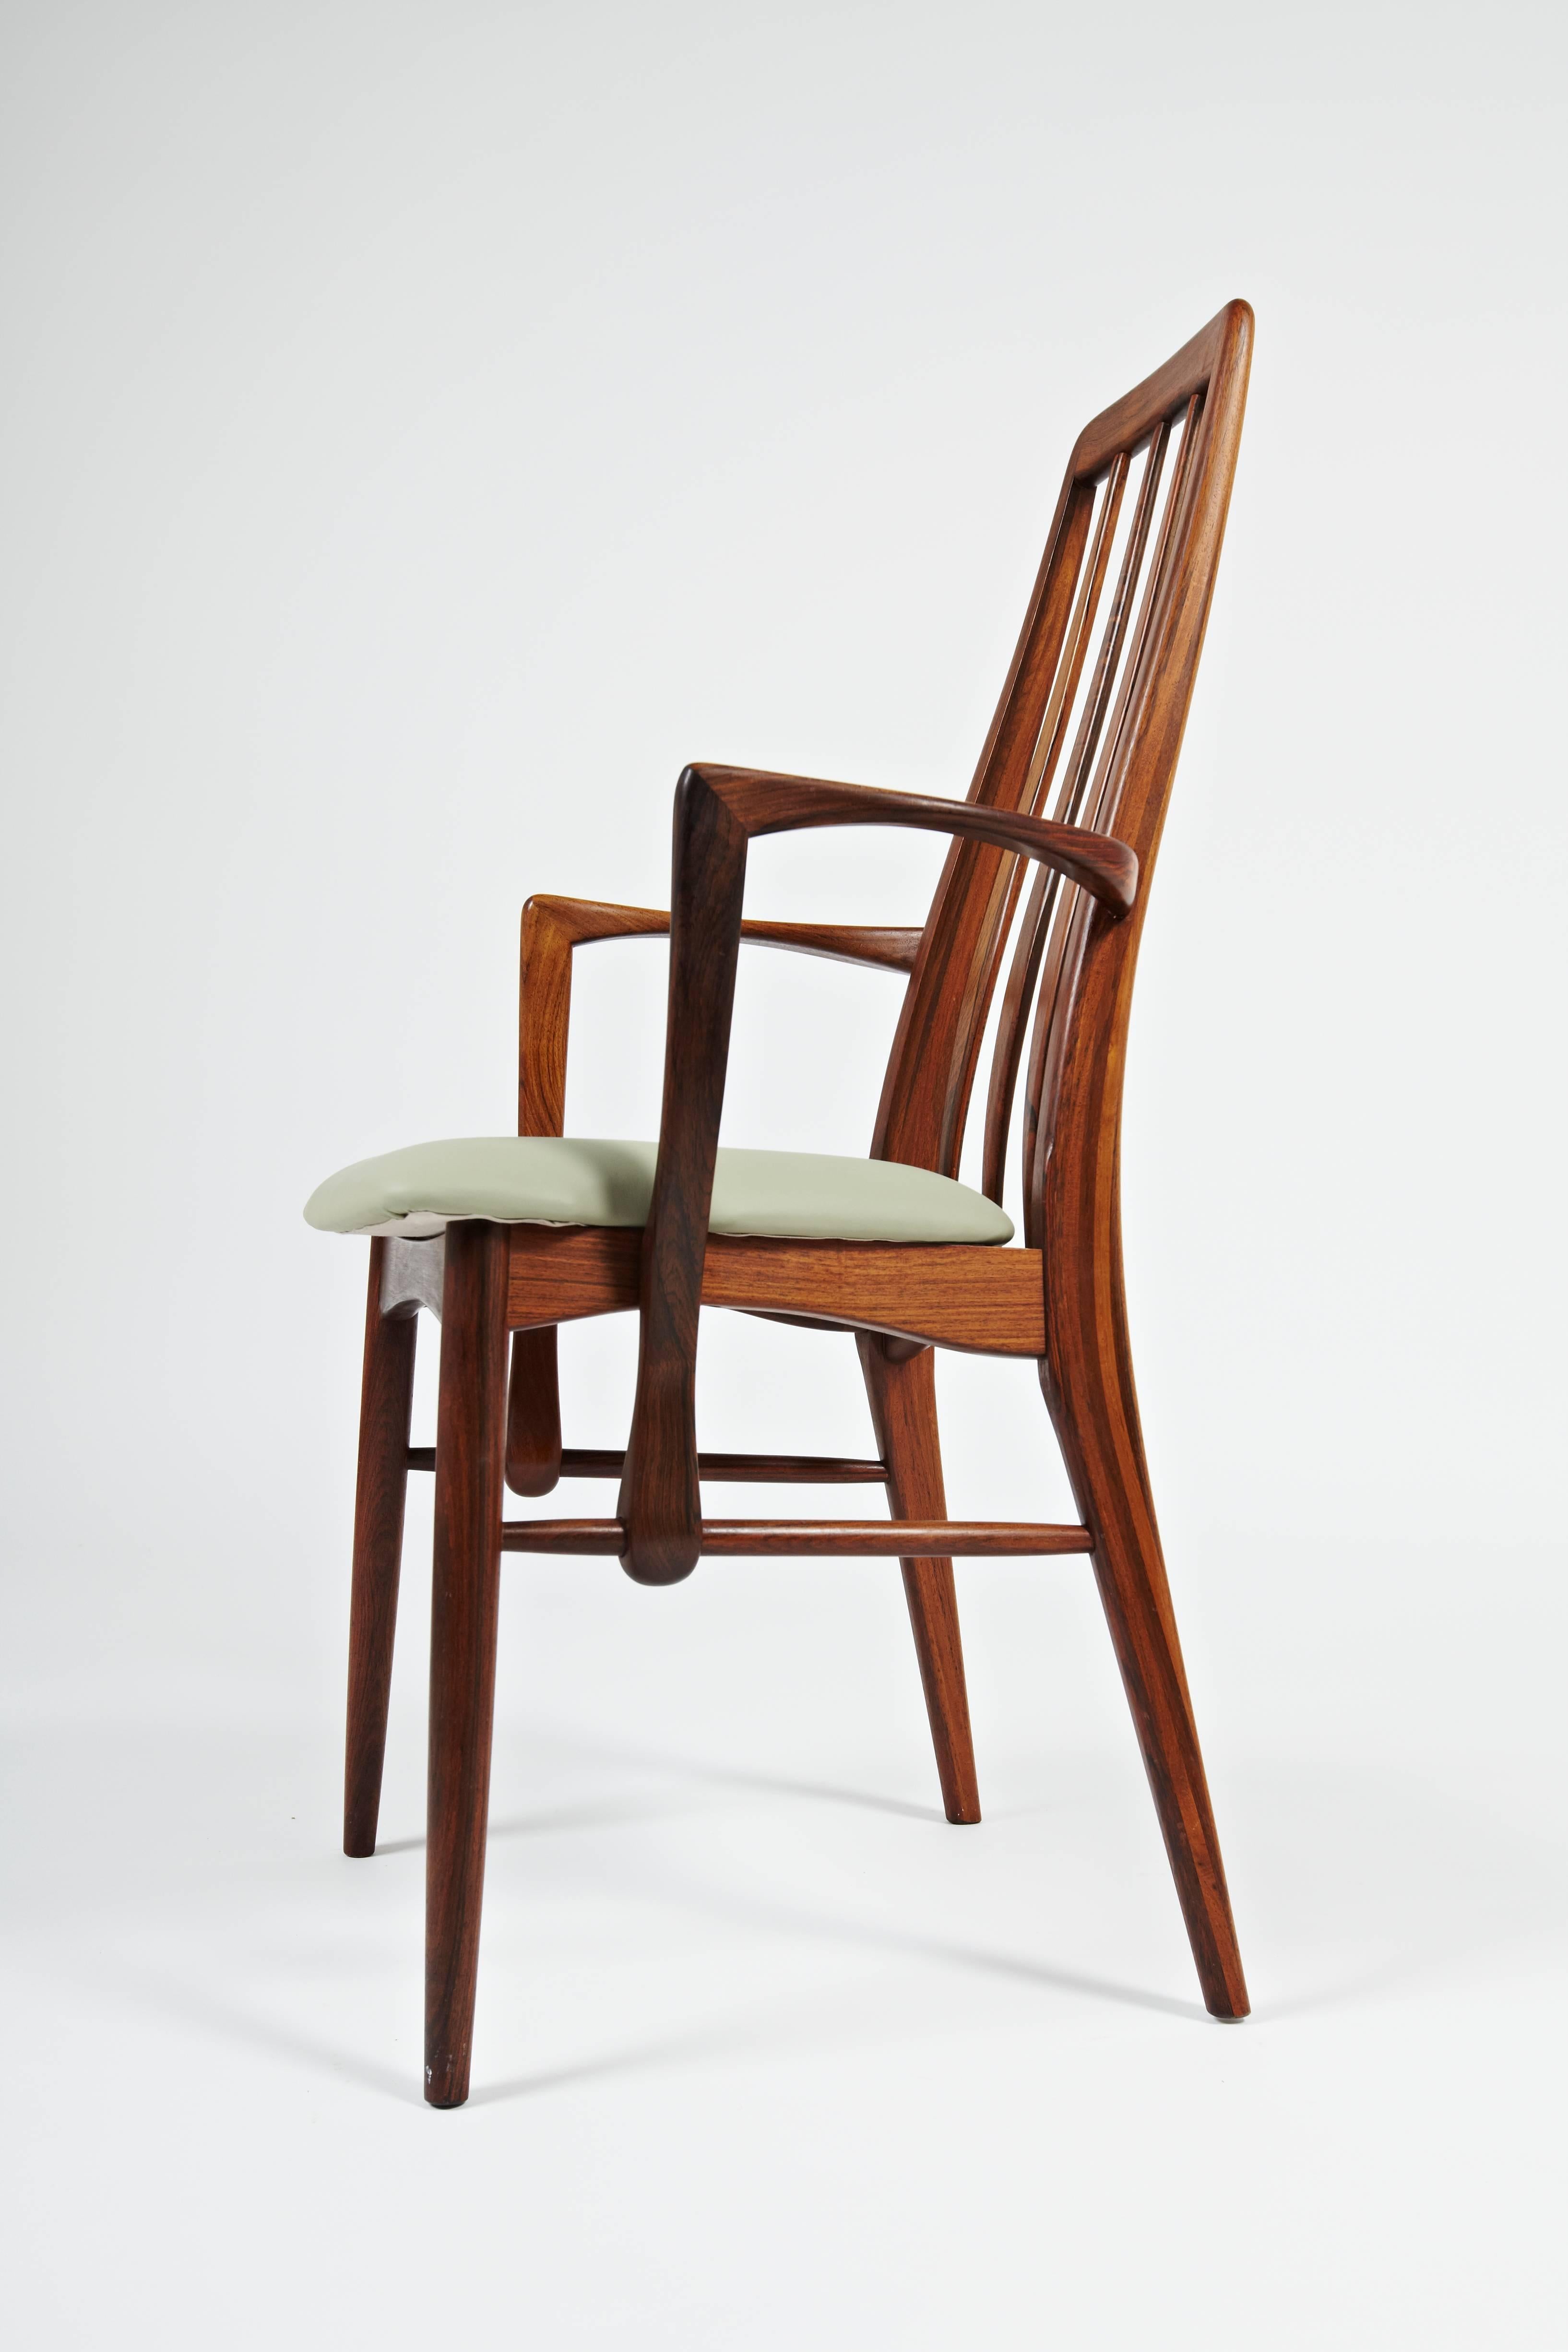 Niels Kofoed Rosewood Dining Chair with Arms, circa 1964 For Sale 1